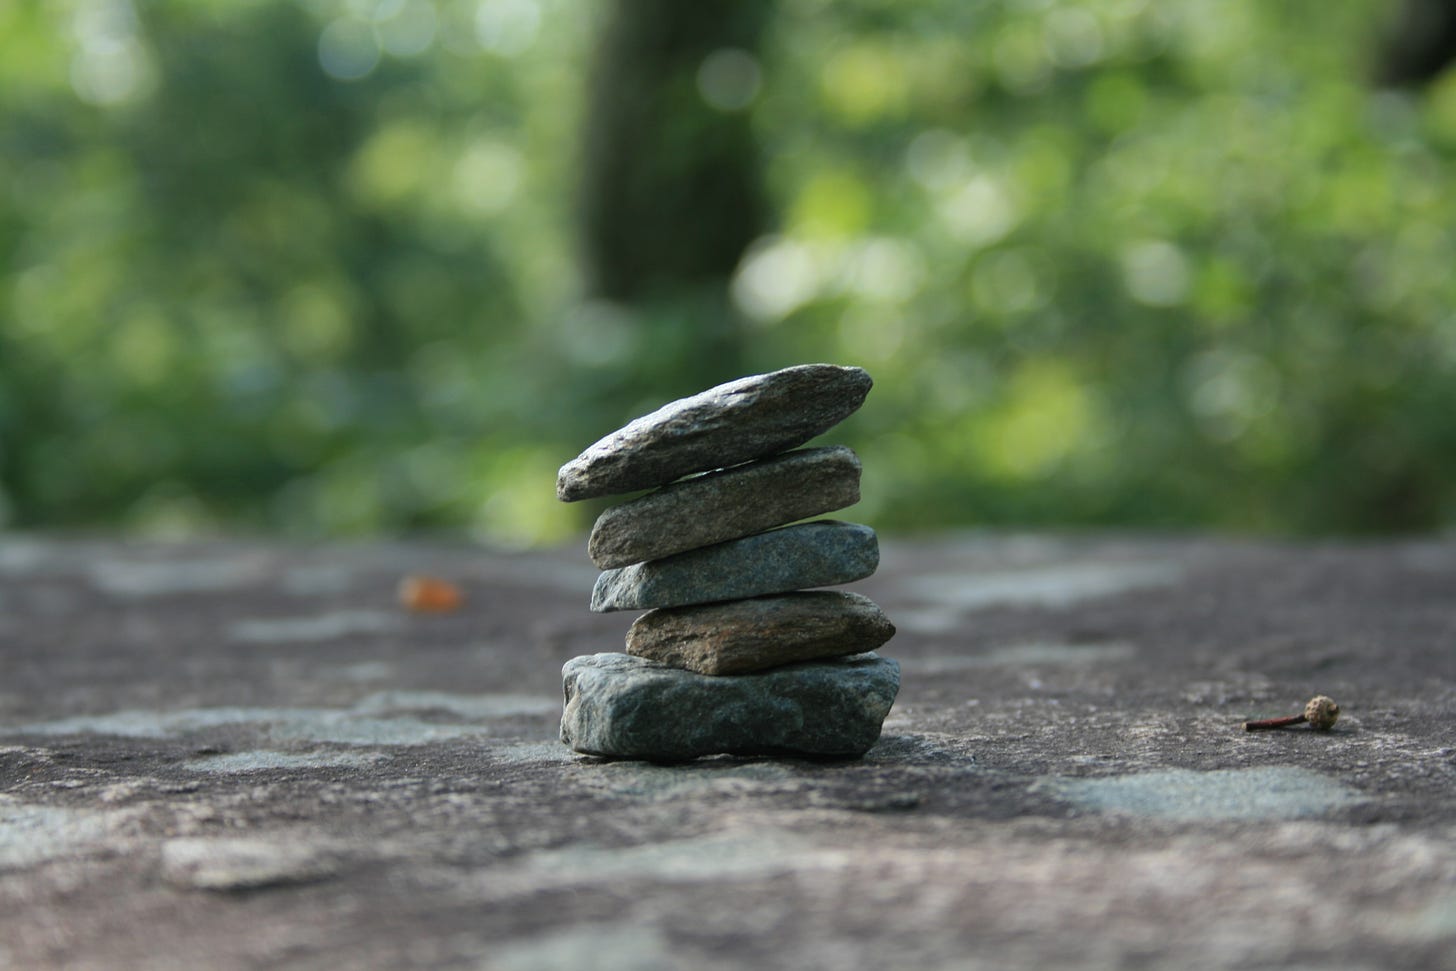 Pebbles stacked in meditative way.